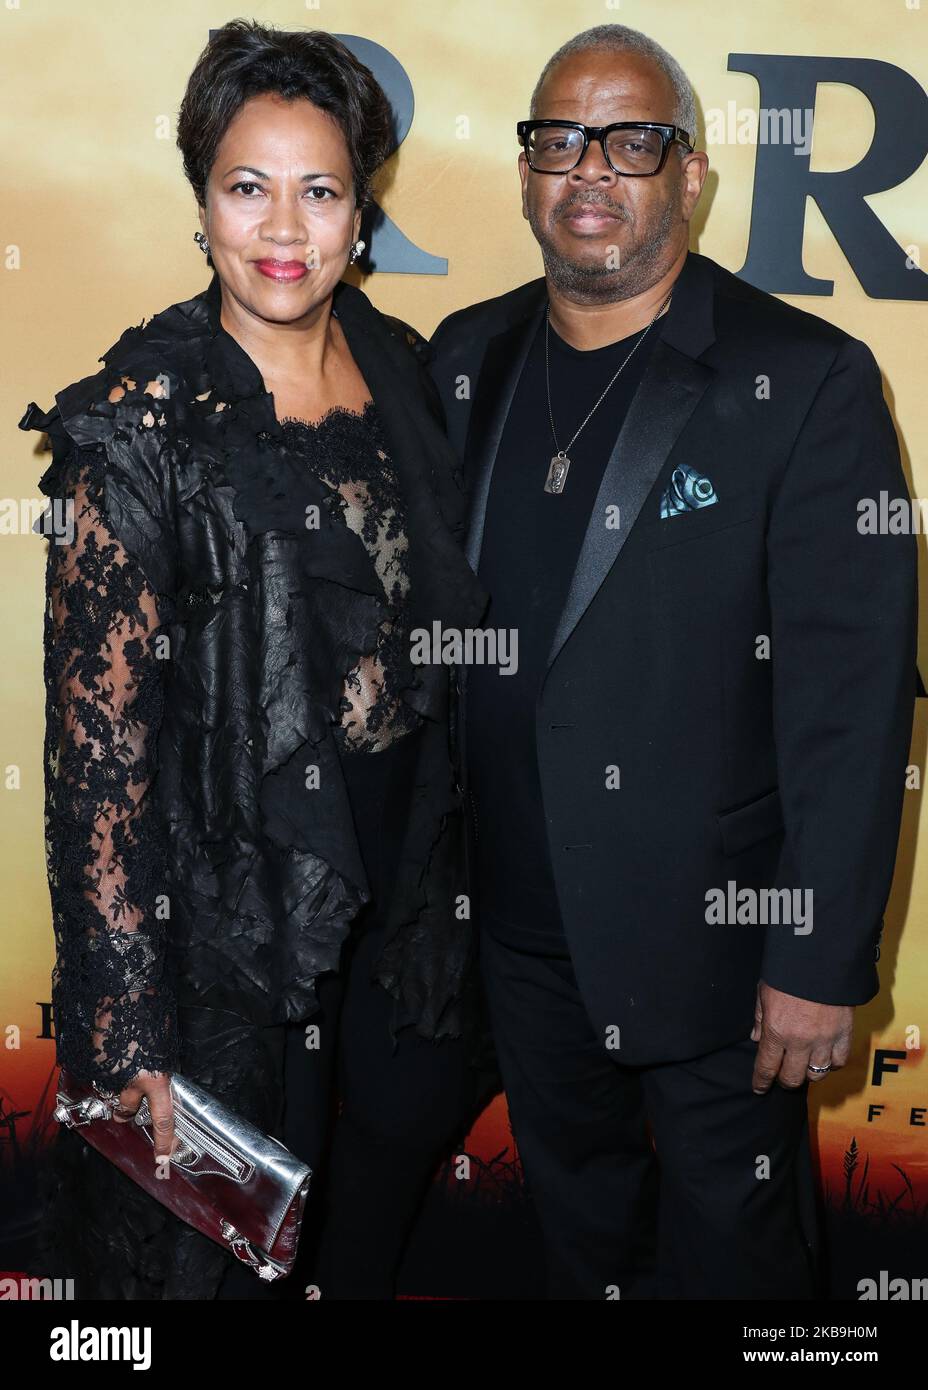 LOS ANGELES, CALIFORNIA, USA - OCTOBER 29: Robin Burgess and Terence Blanchard arrive at the Los Angeles Premiere Of Focus Features' 'Harriet' held at The Orpheum Theatre on October 29, 2019 in Los Angeles, California, United States. (Photo by Xavier Collin/Image Press Agency/NurPhoto) Stock Photo